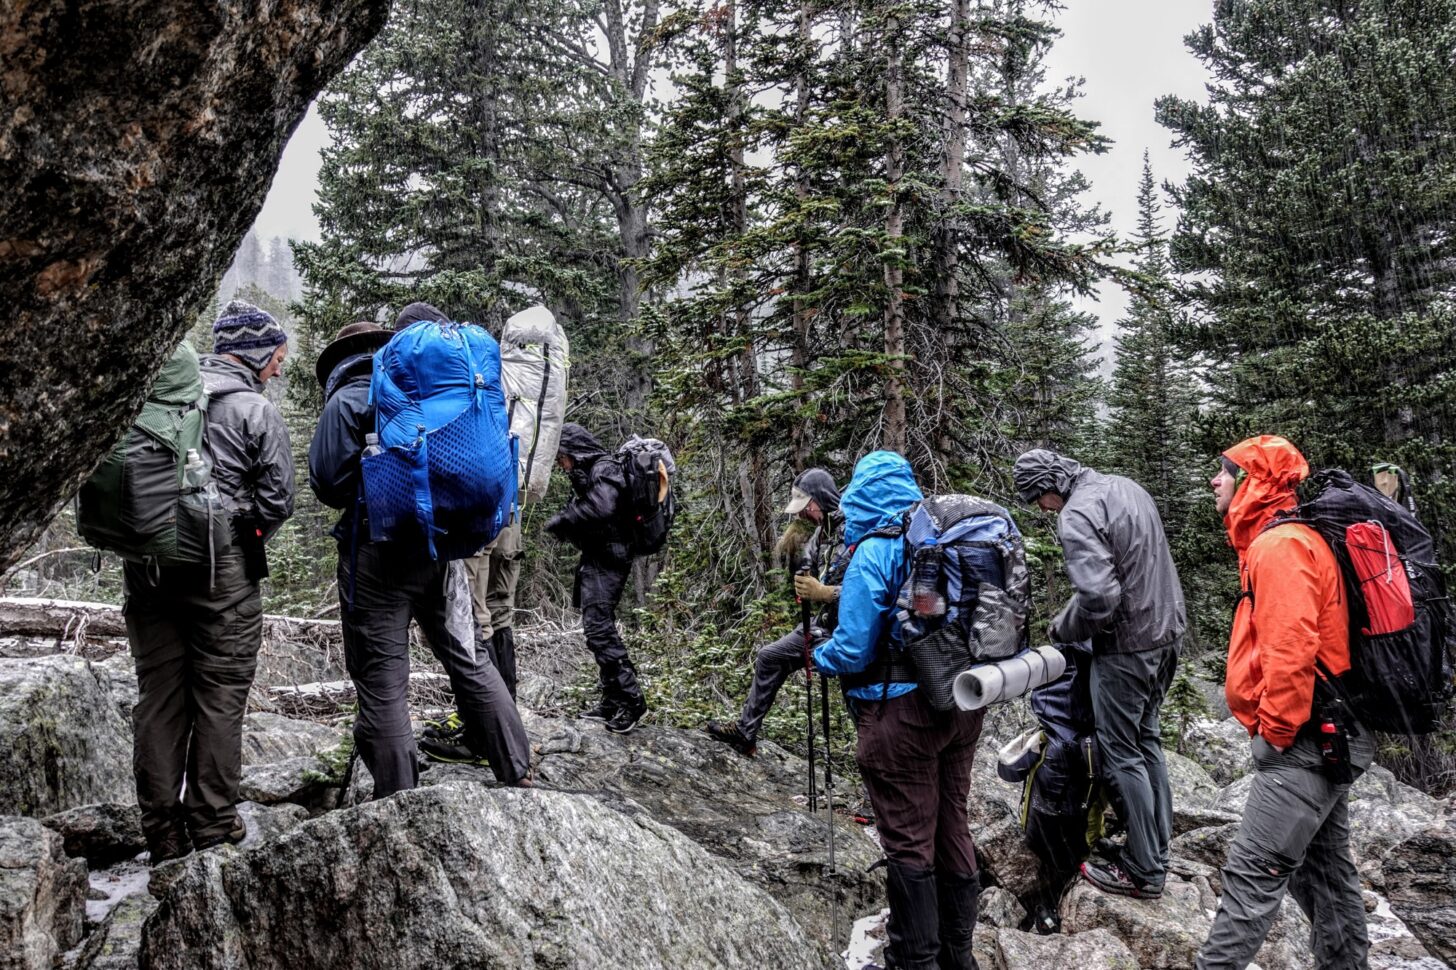 group of hikers in a sleet storm hiking through the forest